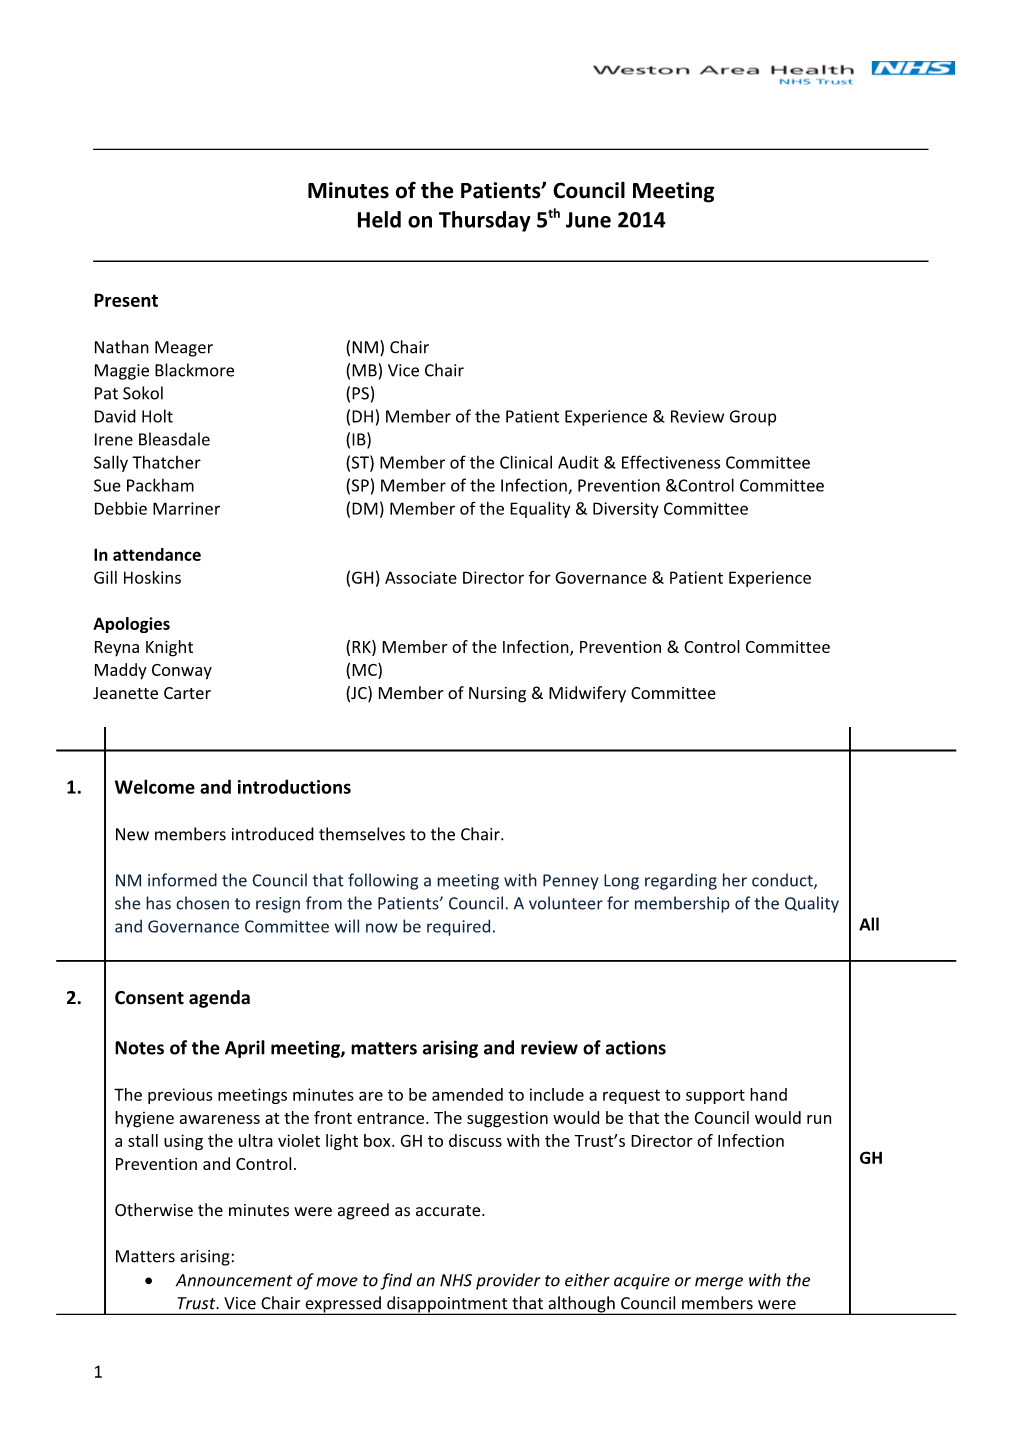 Minutes of the Patients Council Meeting